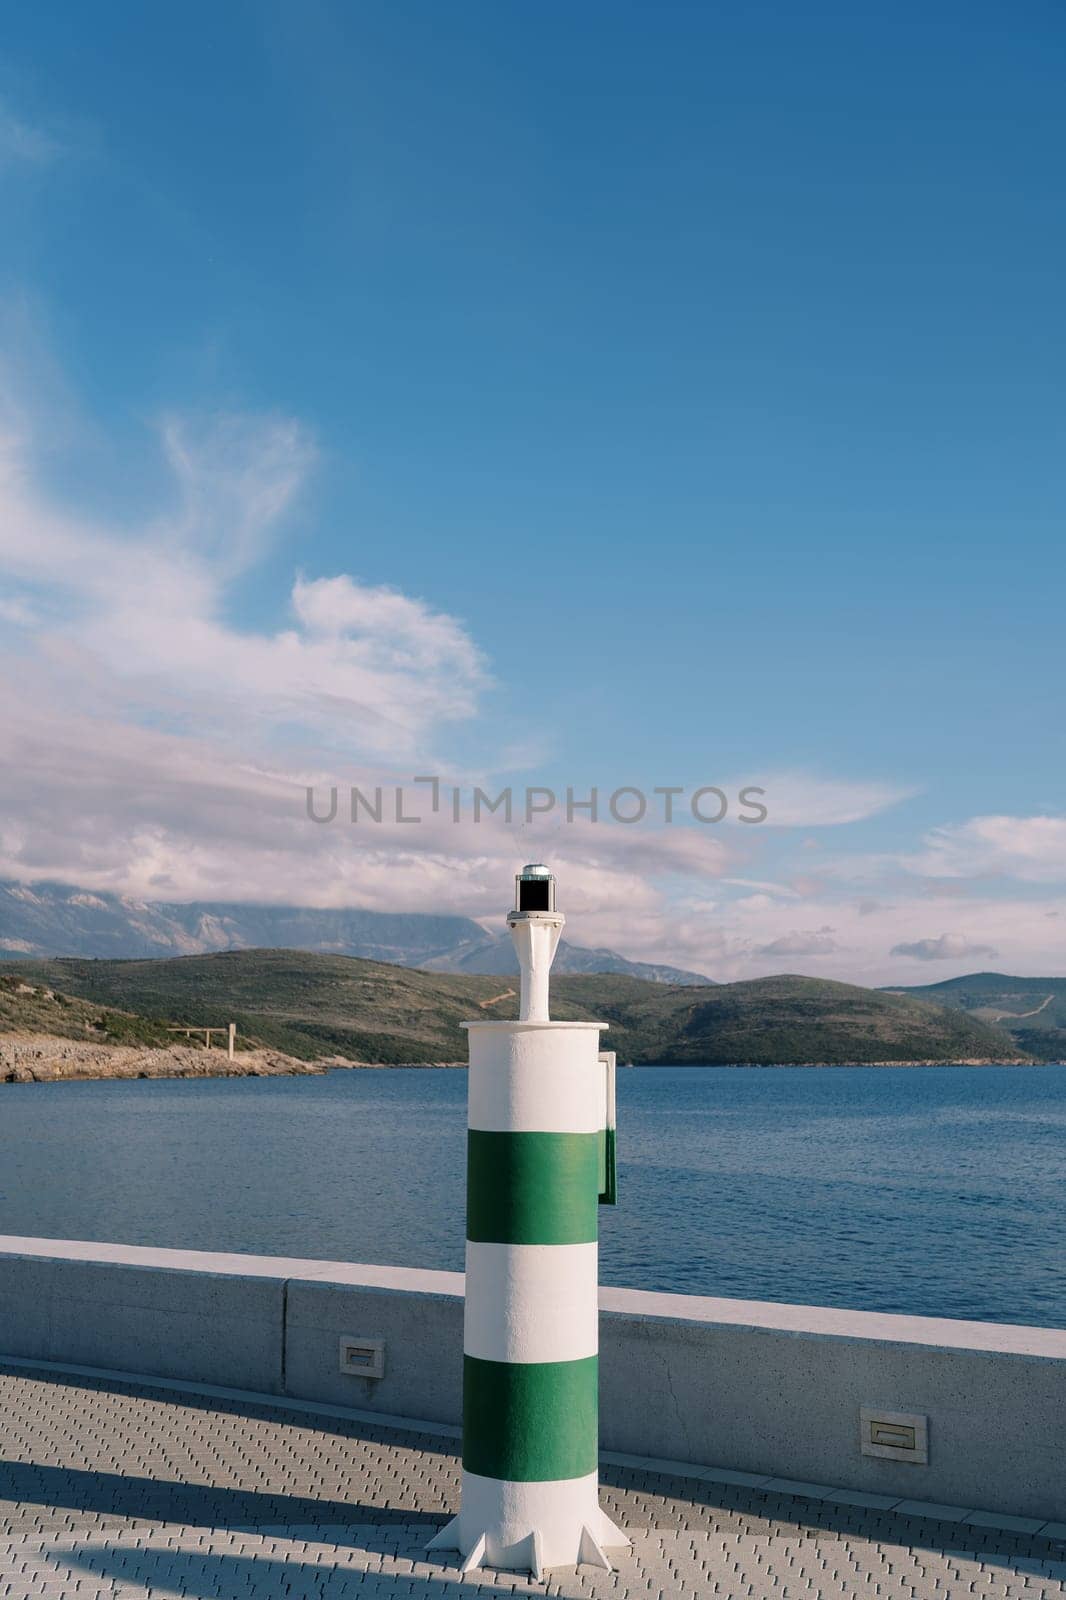 Navigation beacon on the pier against the backdrop of mountains by Nadtochiy